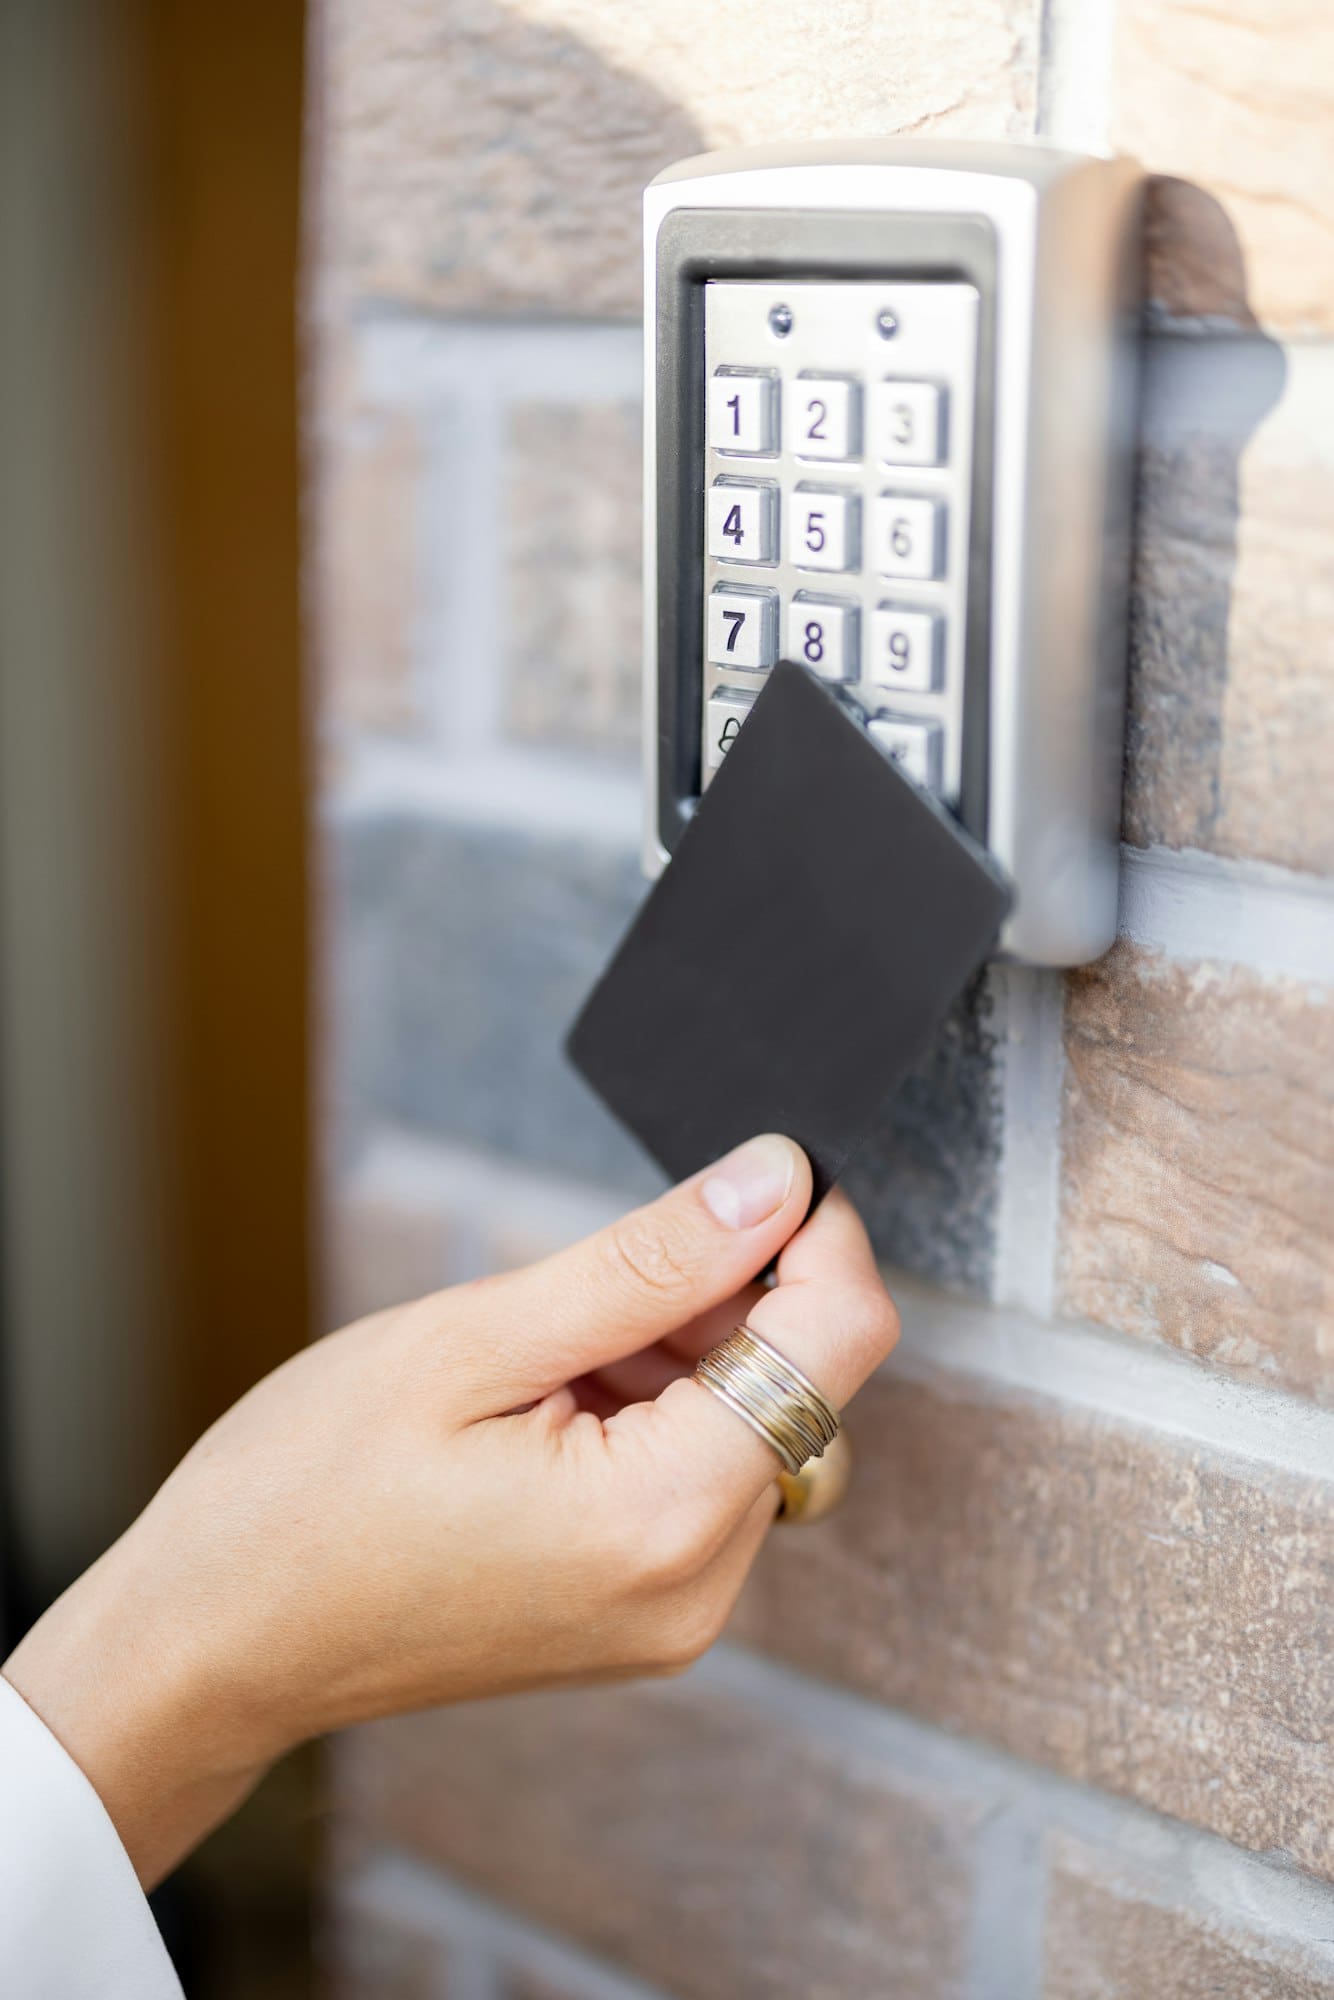 Attaching card to the electronic reader to access the office or apartment